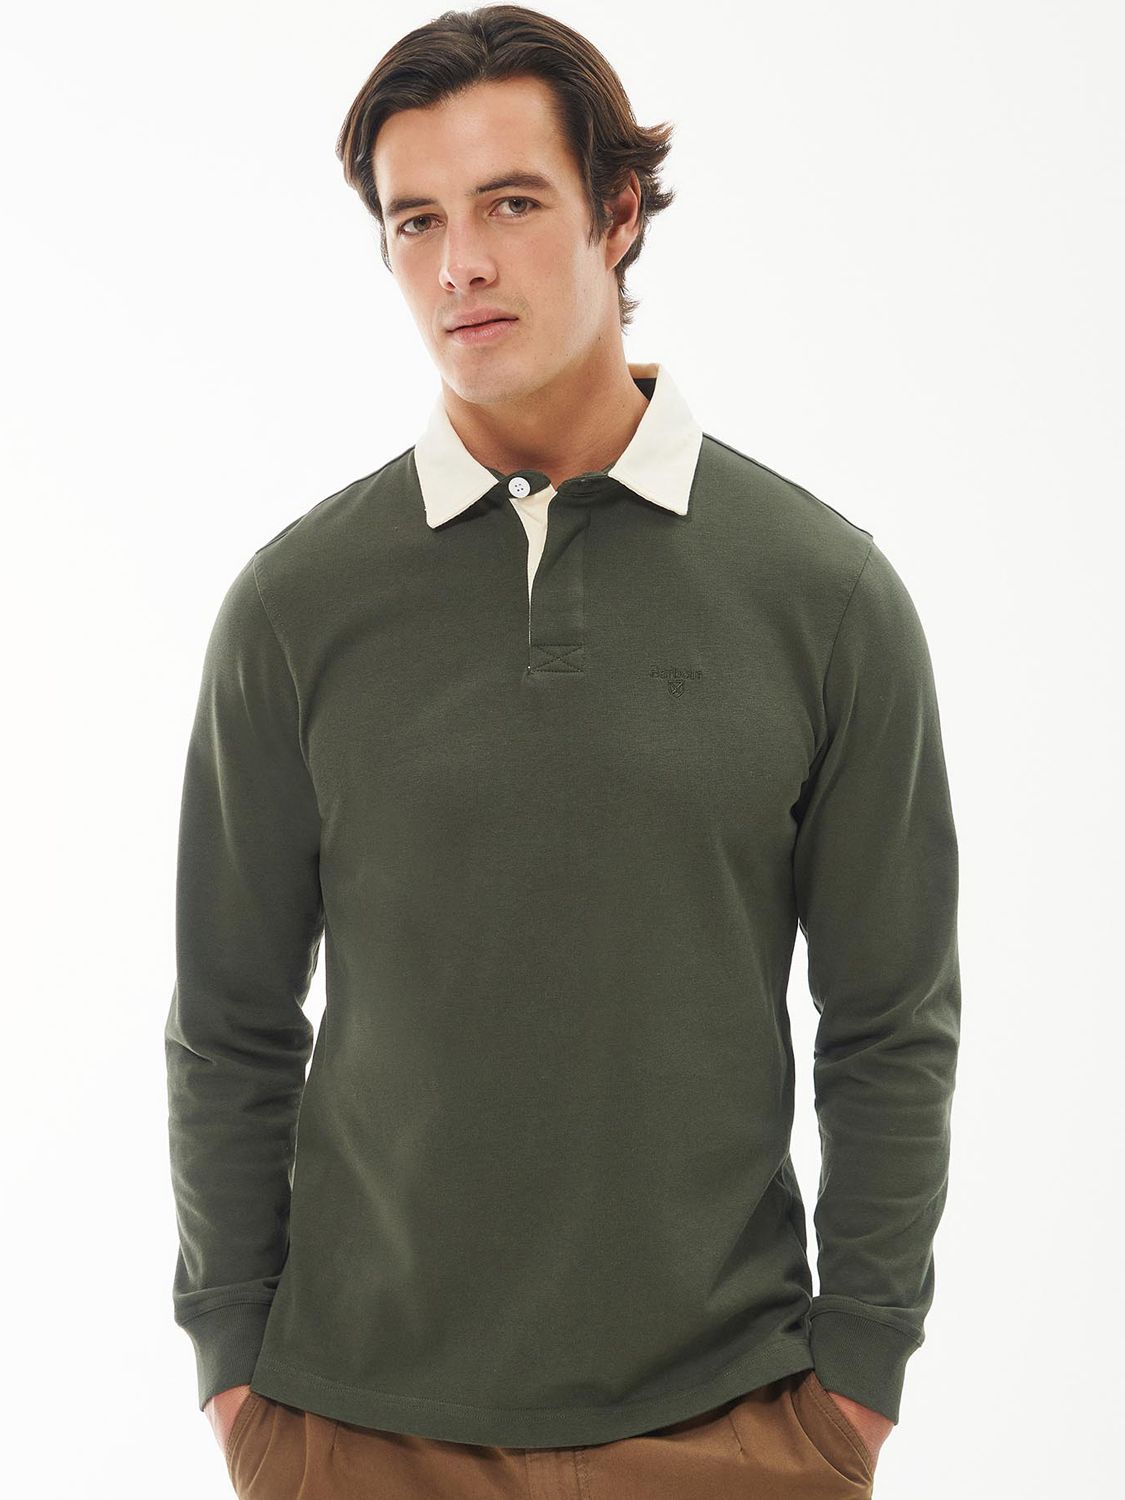 S Barbour Shirt, Green, Howtown Rugby